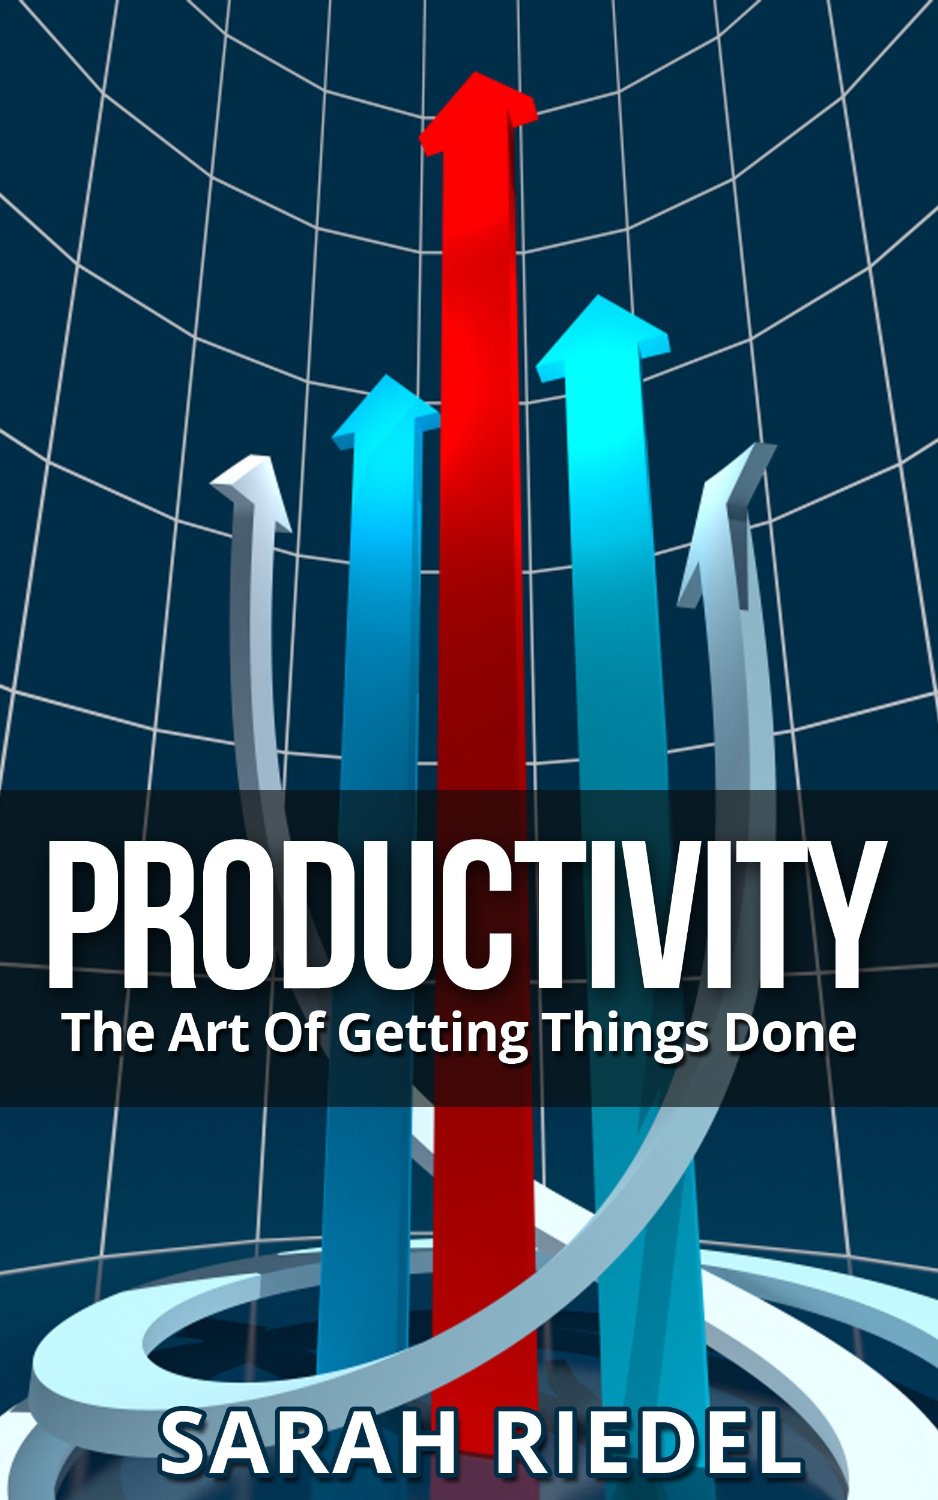 Productivity – The Art of Getting Things Done by Sarah Riedel